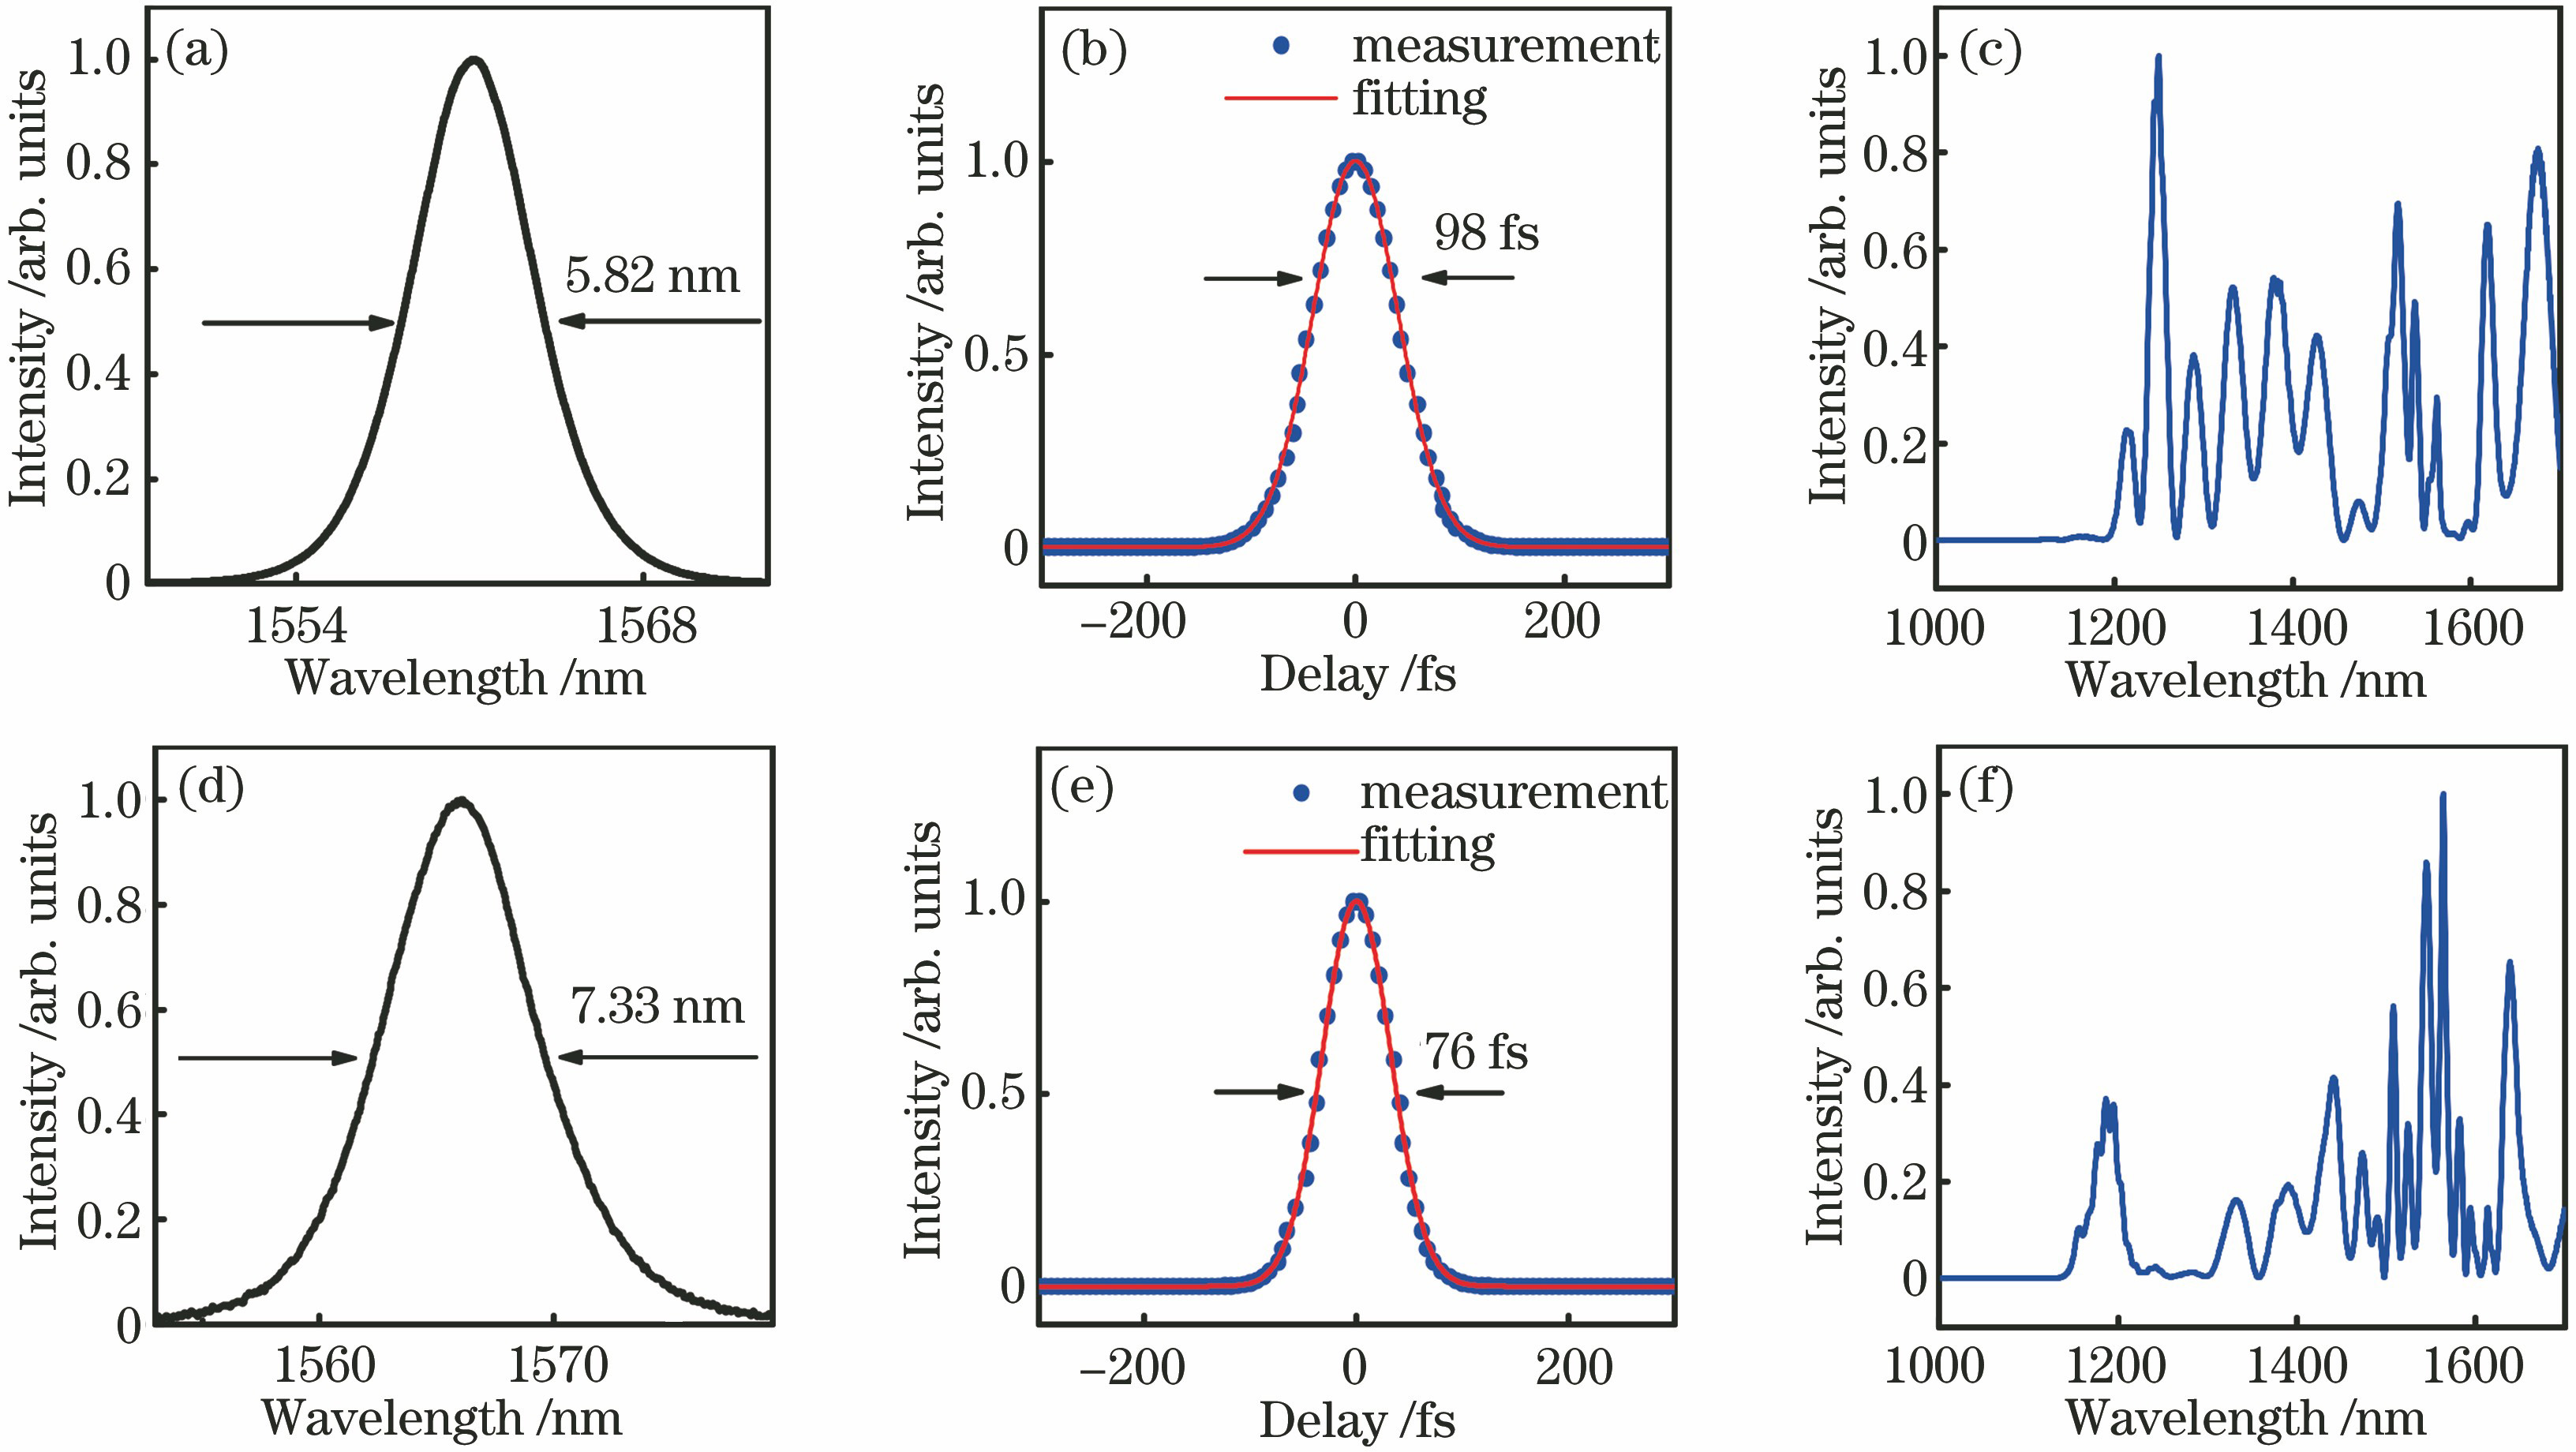 Output characteristics and supercontinuum of two pulsed lasers. (a) Spectrum of oscillator A; (b) pulse width after two-stage amplification of pulsed laser A; (c) supercontinuum of pulsed laser A; (d) spectrum of oscillator B; (e) pulse width after two-stage amplification of pulsed laser B; (f) supercontinuum of pulsed laser B